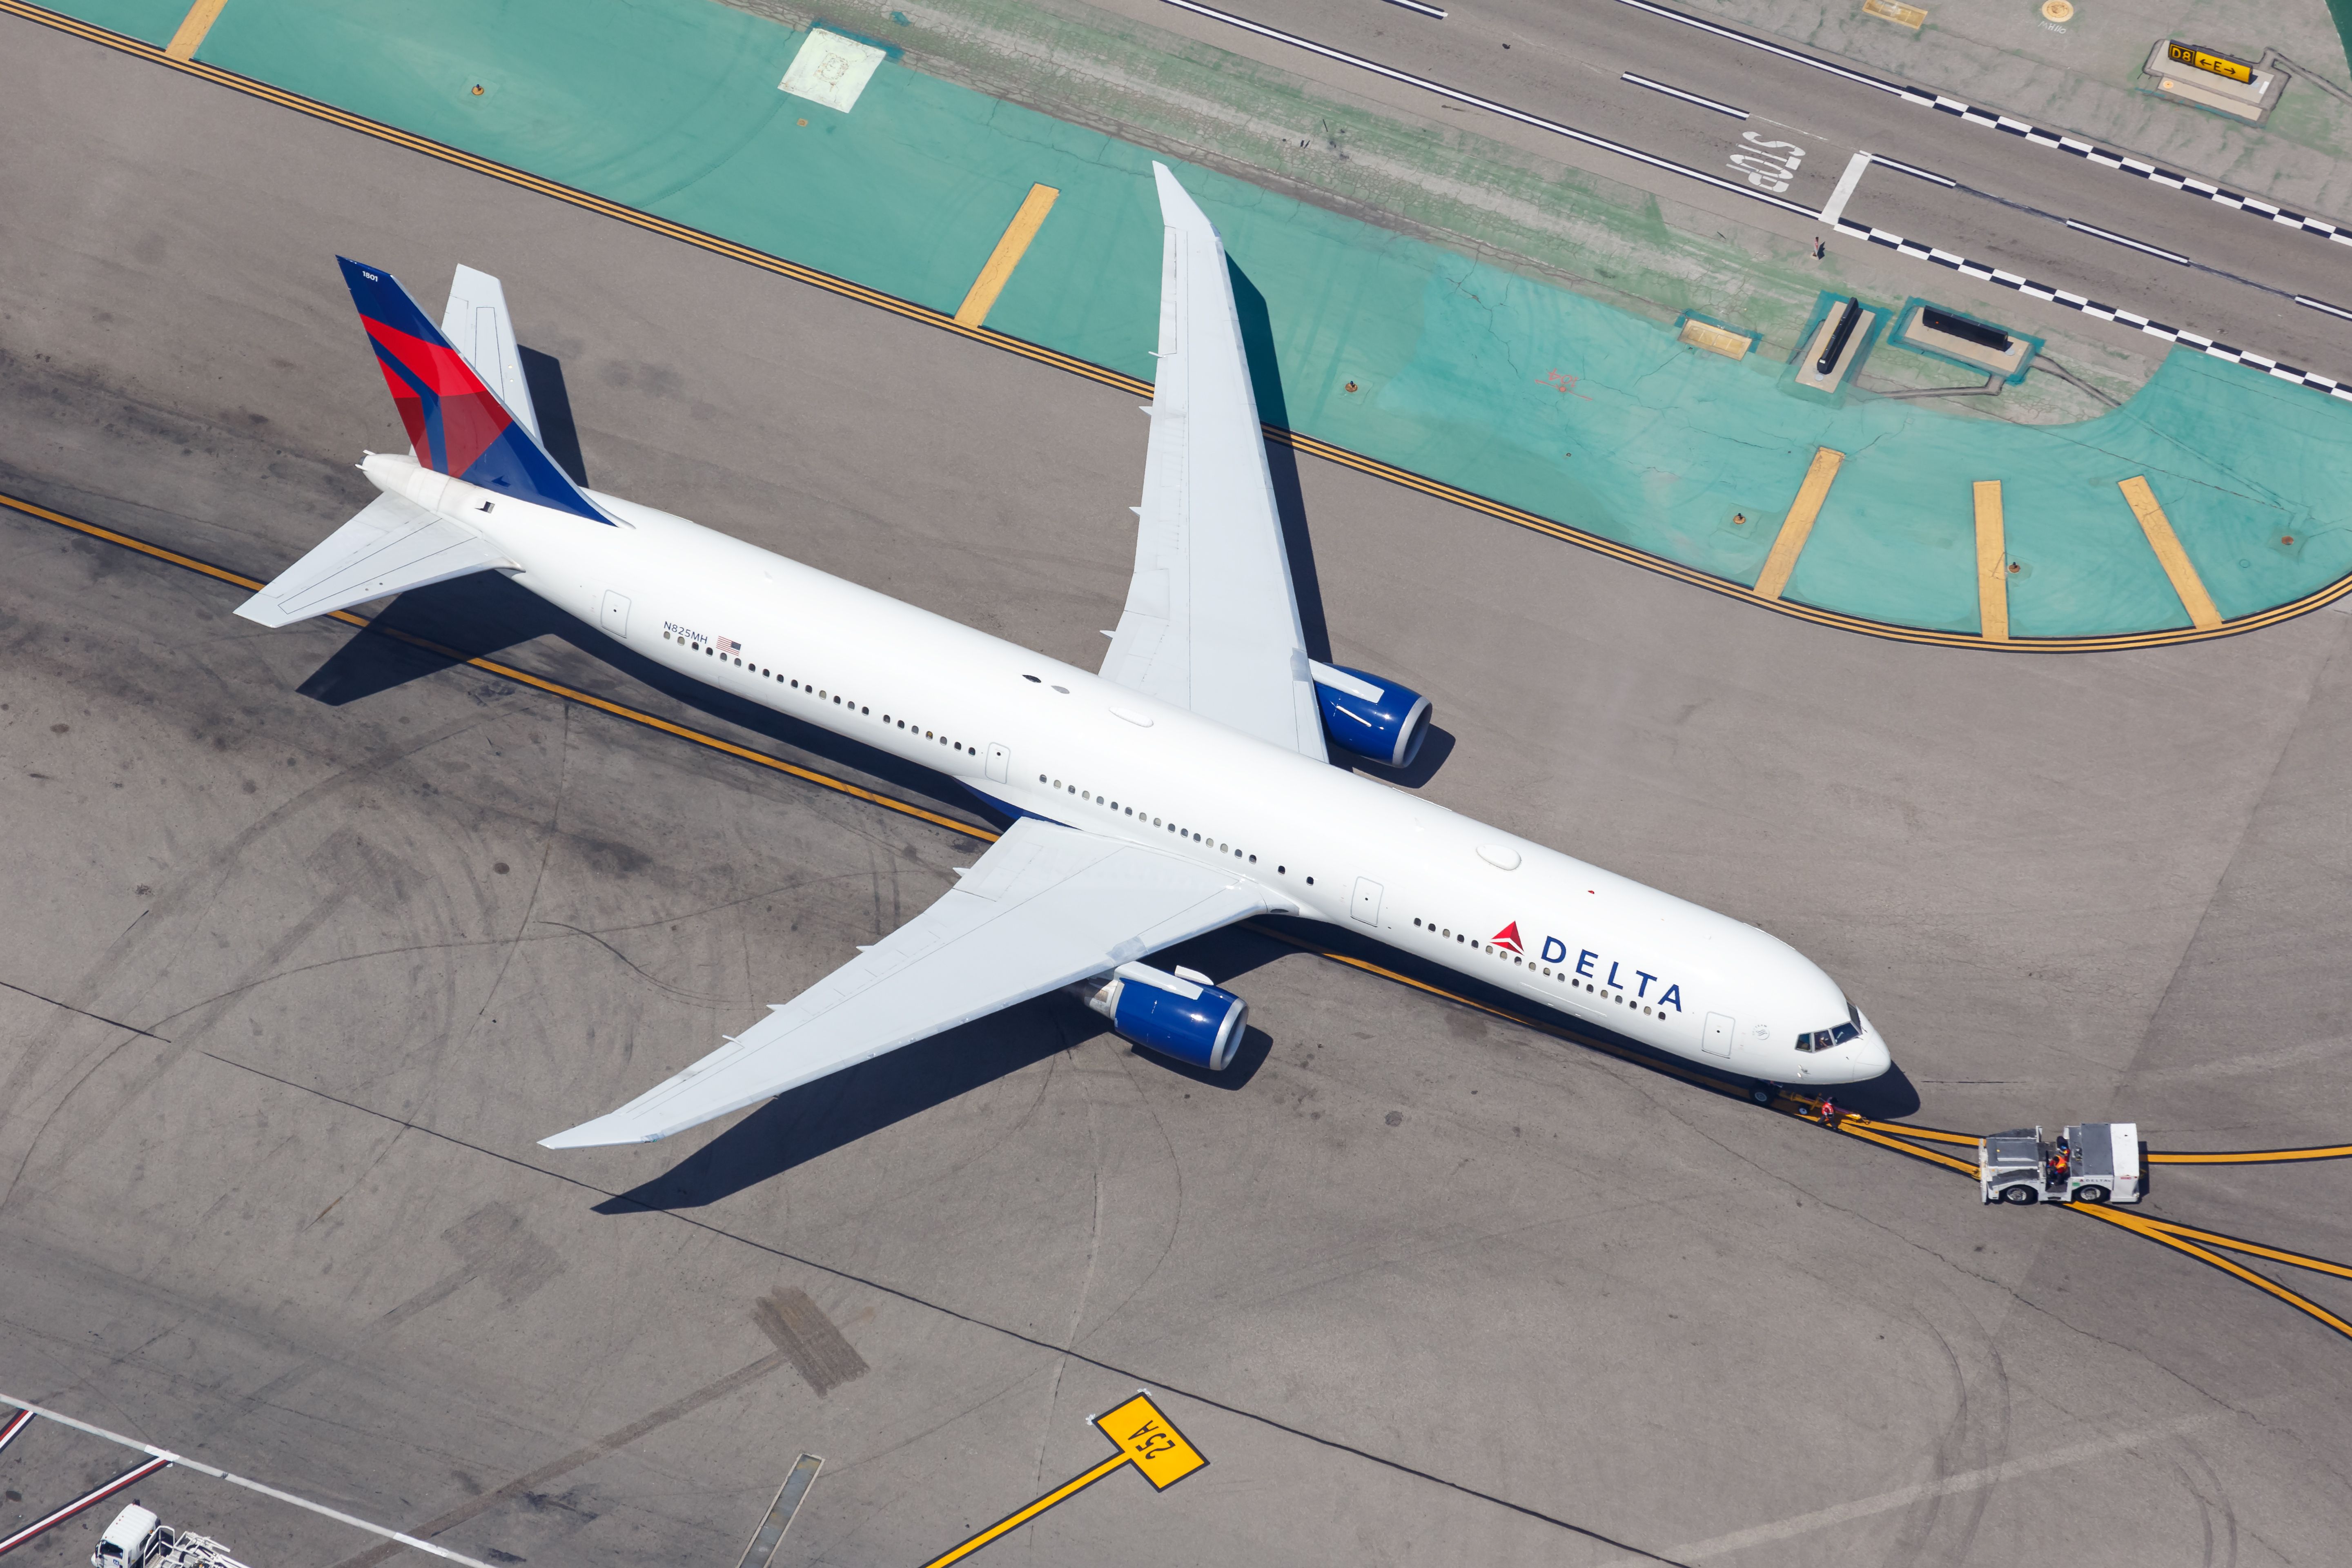 An Aerial view of a Delta Air Lines Boeing 767-400ER on the apron at LAX.